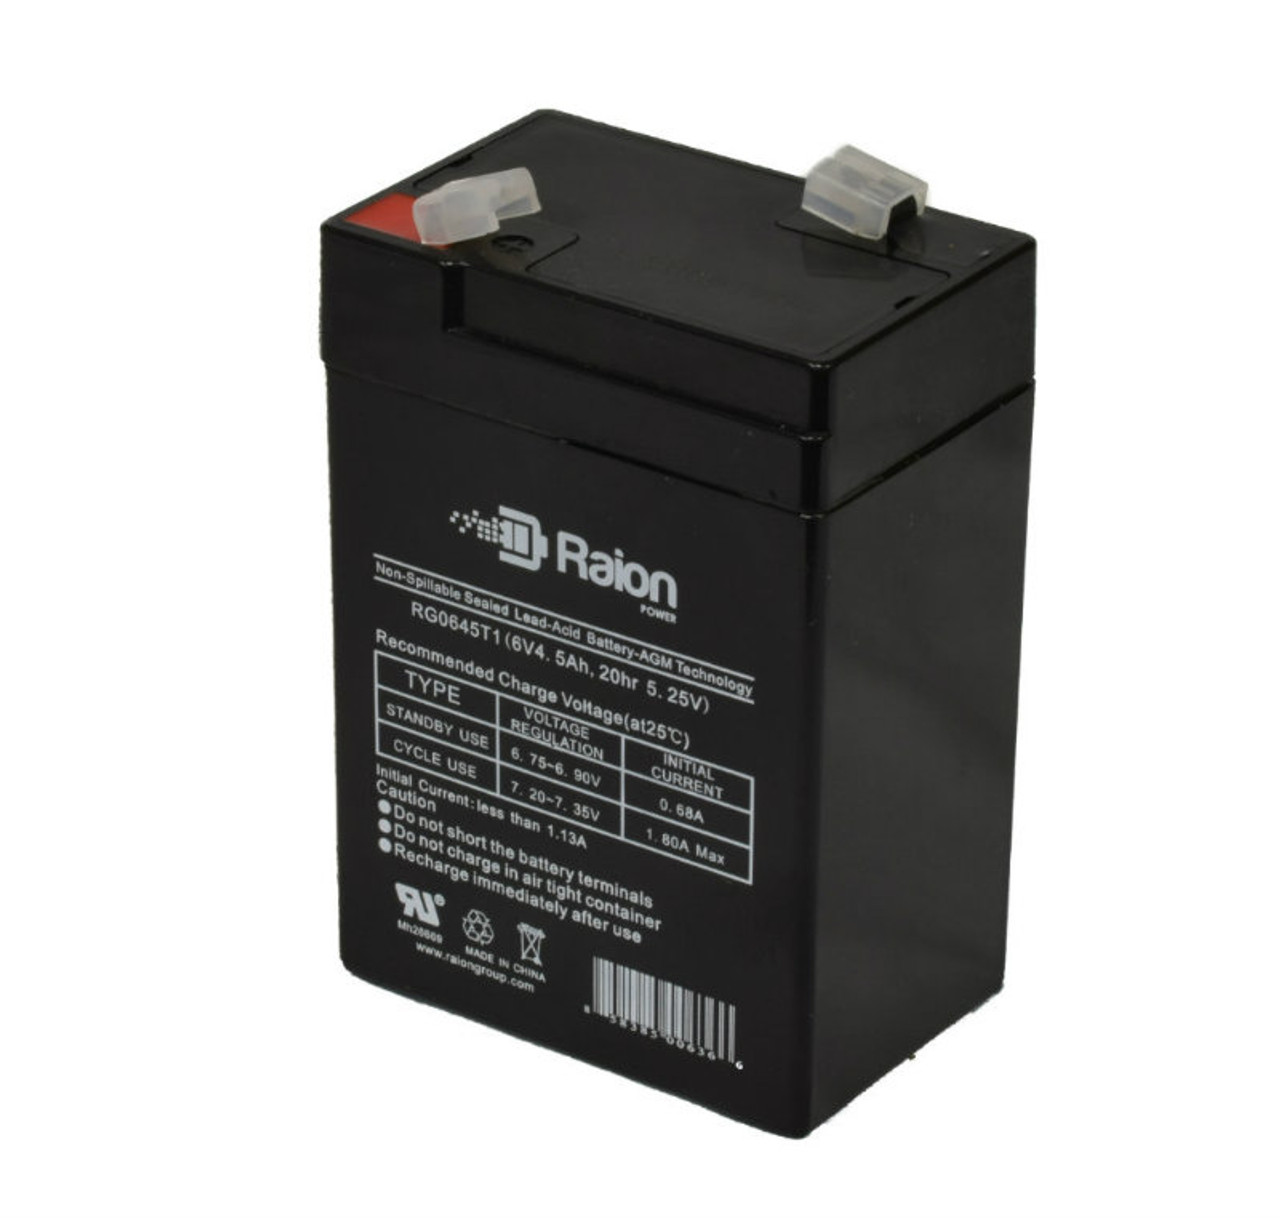 Raion Power RG0645T1 6V 4.5Ah Replacement Battery Cartridge for Holophane M3